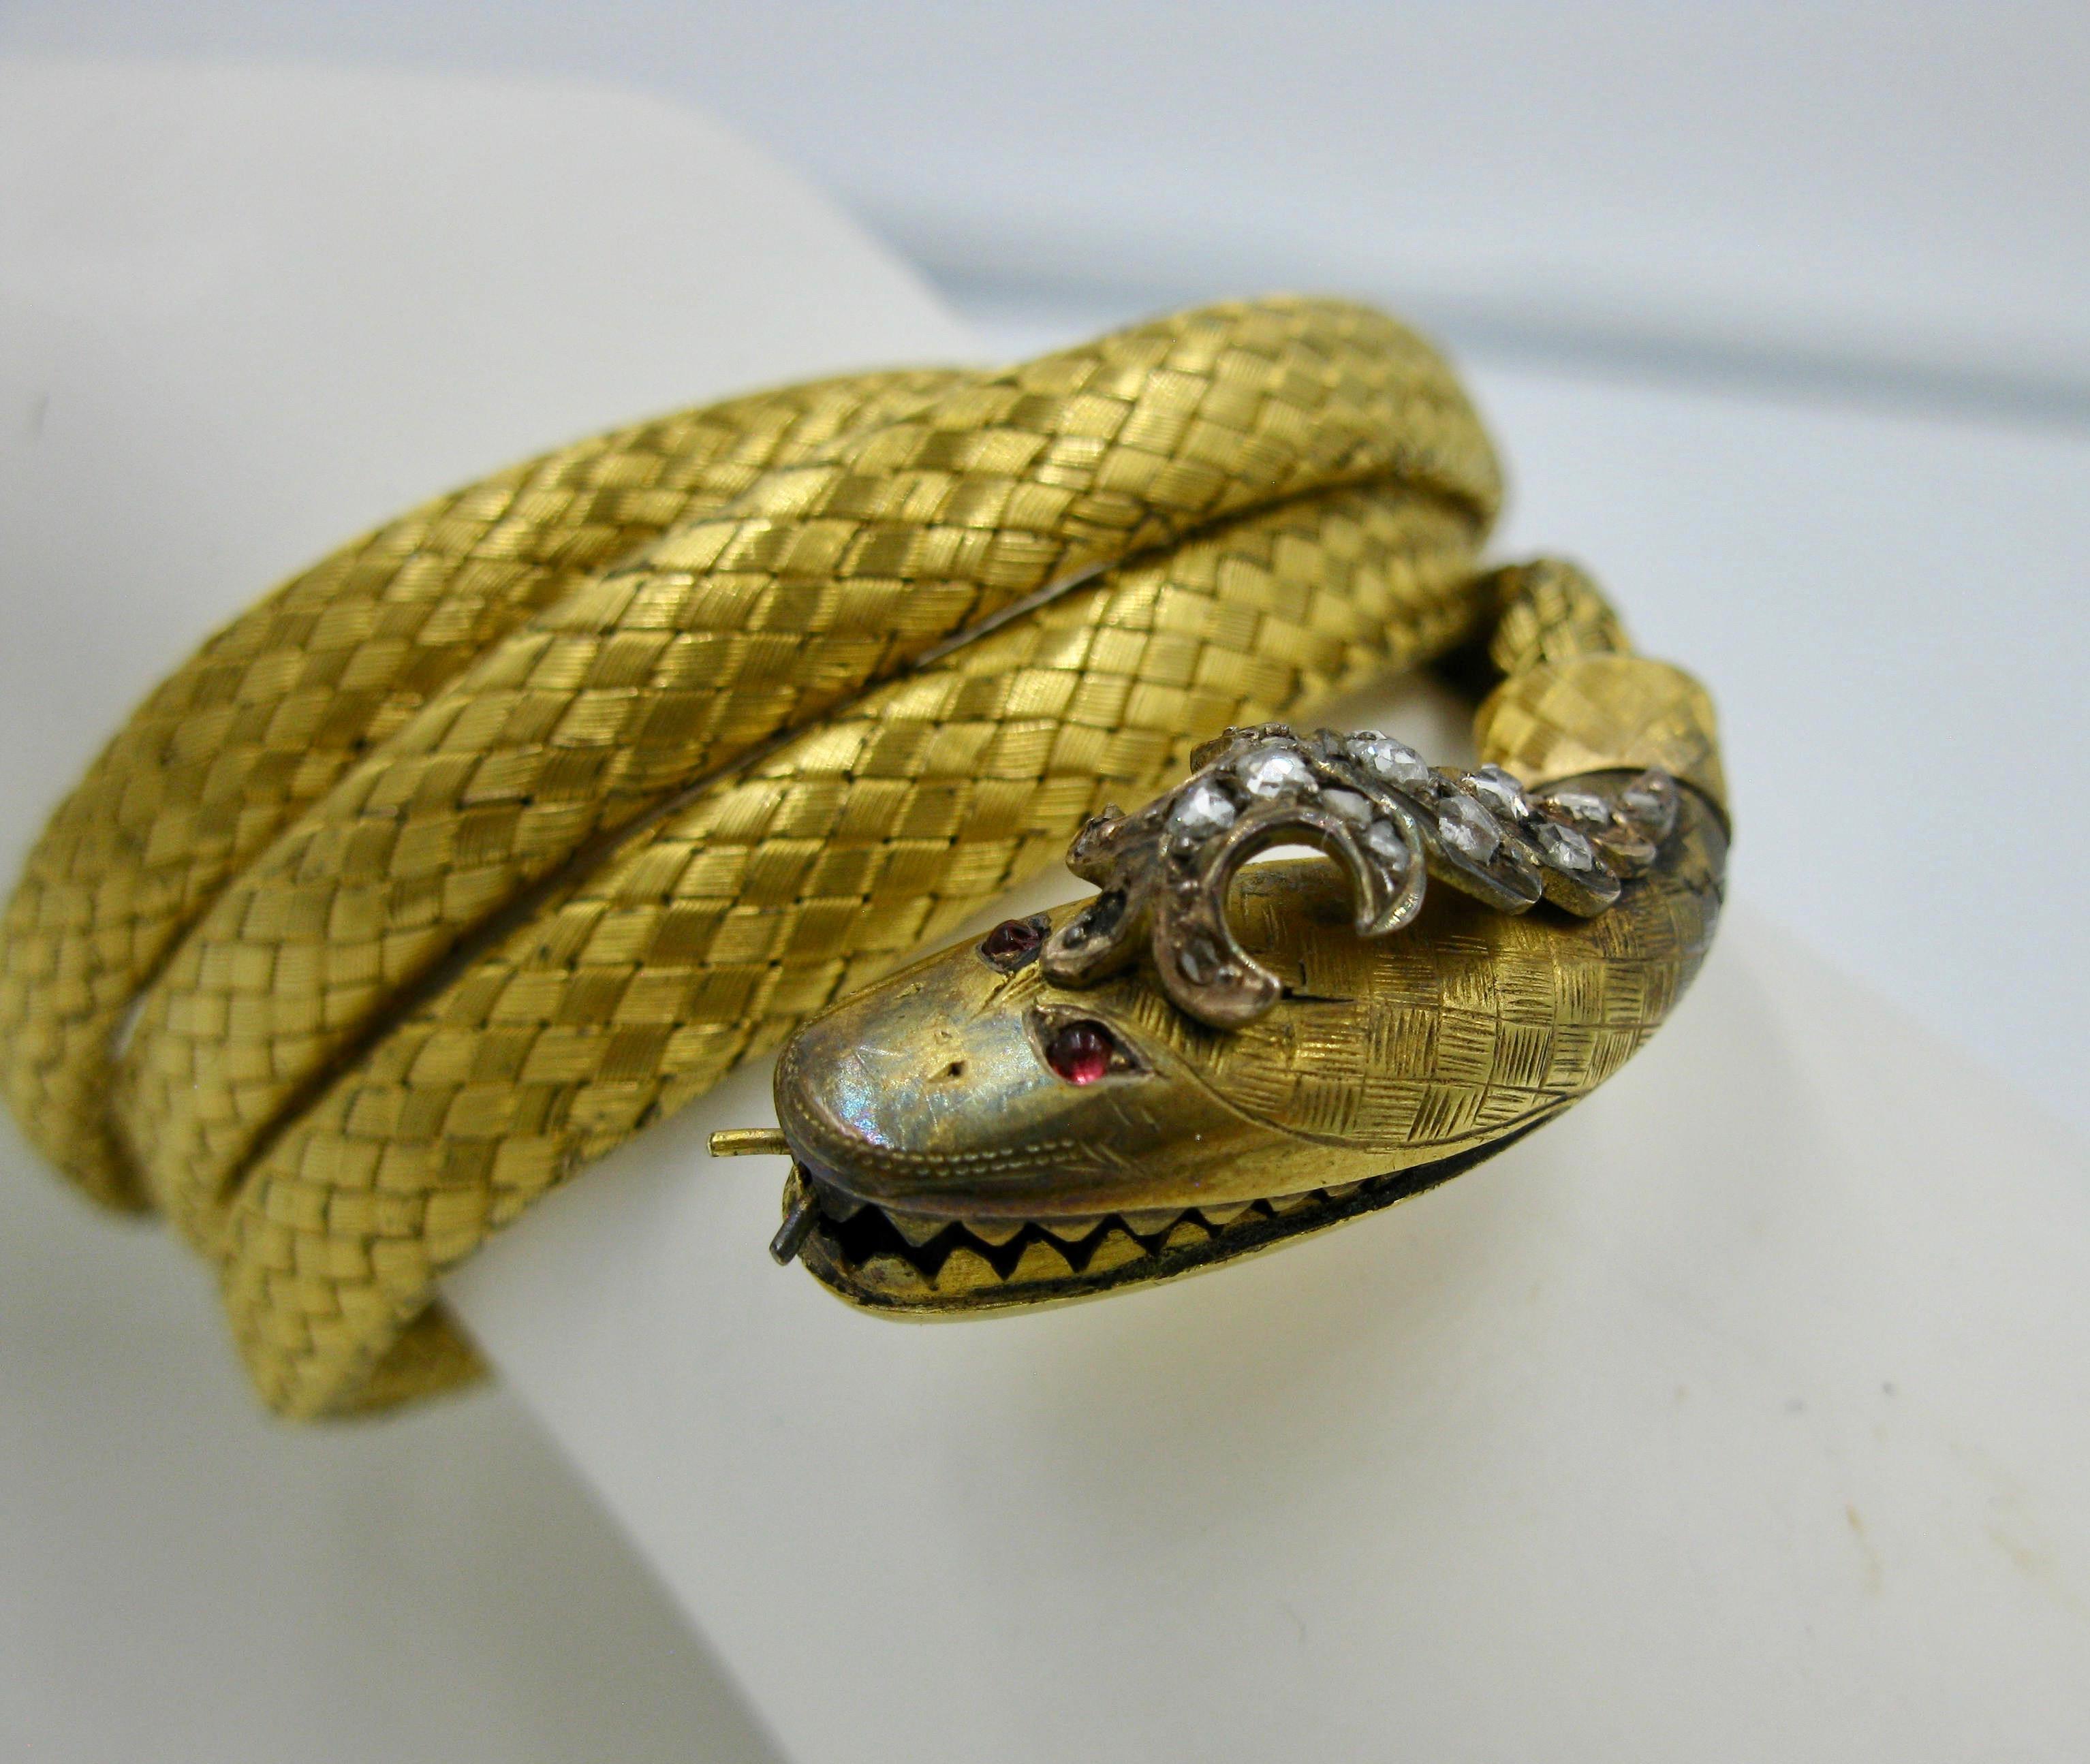 This is a very rare and wonderful antique Victorian Coiled Snake Bracelet in 14 Karat Gold with a Rose Cut Diamond crown and cabochon Ruby Eyes dating to circa 1840.  A wonderful adjustable mesh design in vibrant rich yellow gold.  The dramatic head